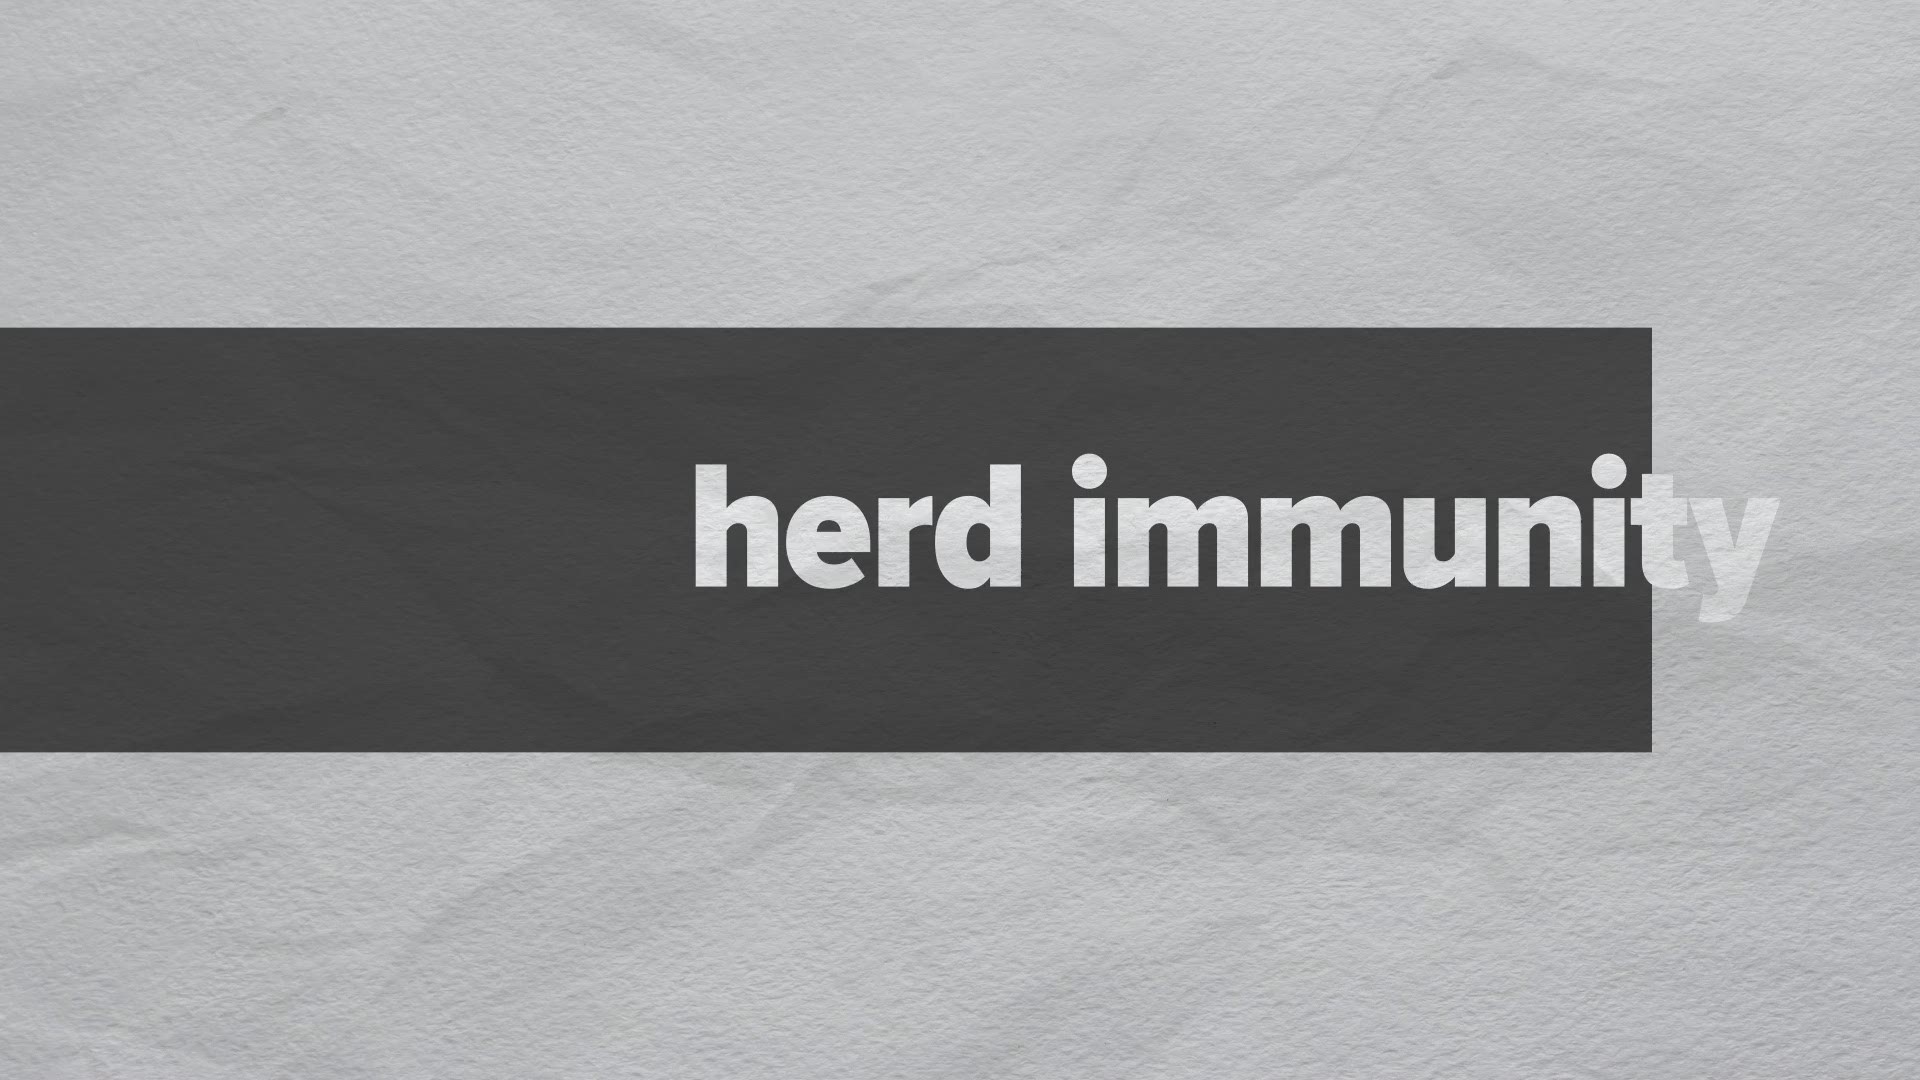 Some experts are saying we need “herd immunity” to beat coronavirus. How do they know and why do they insist we need a *vaccine to get it?